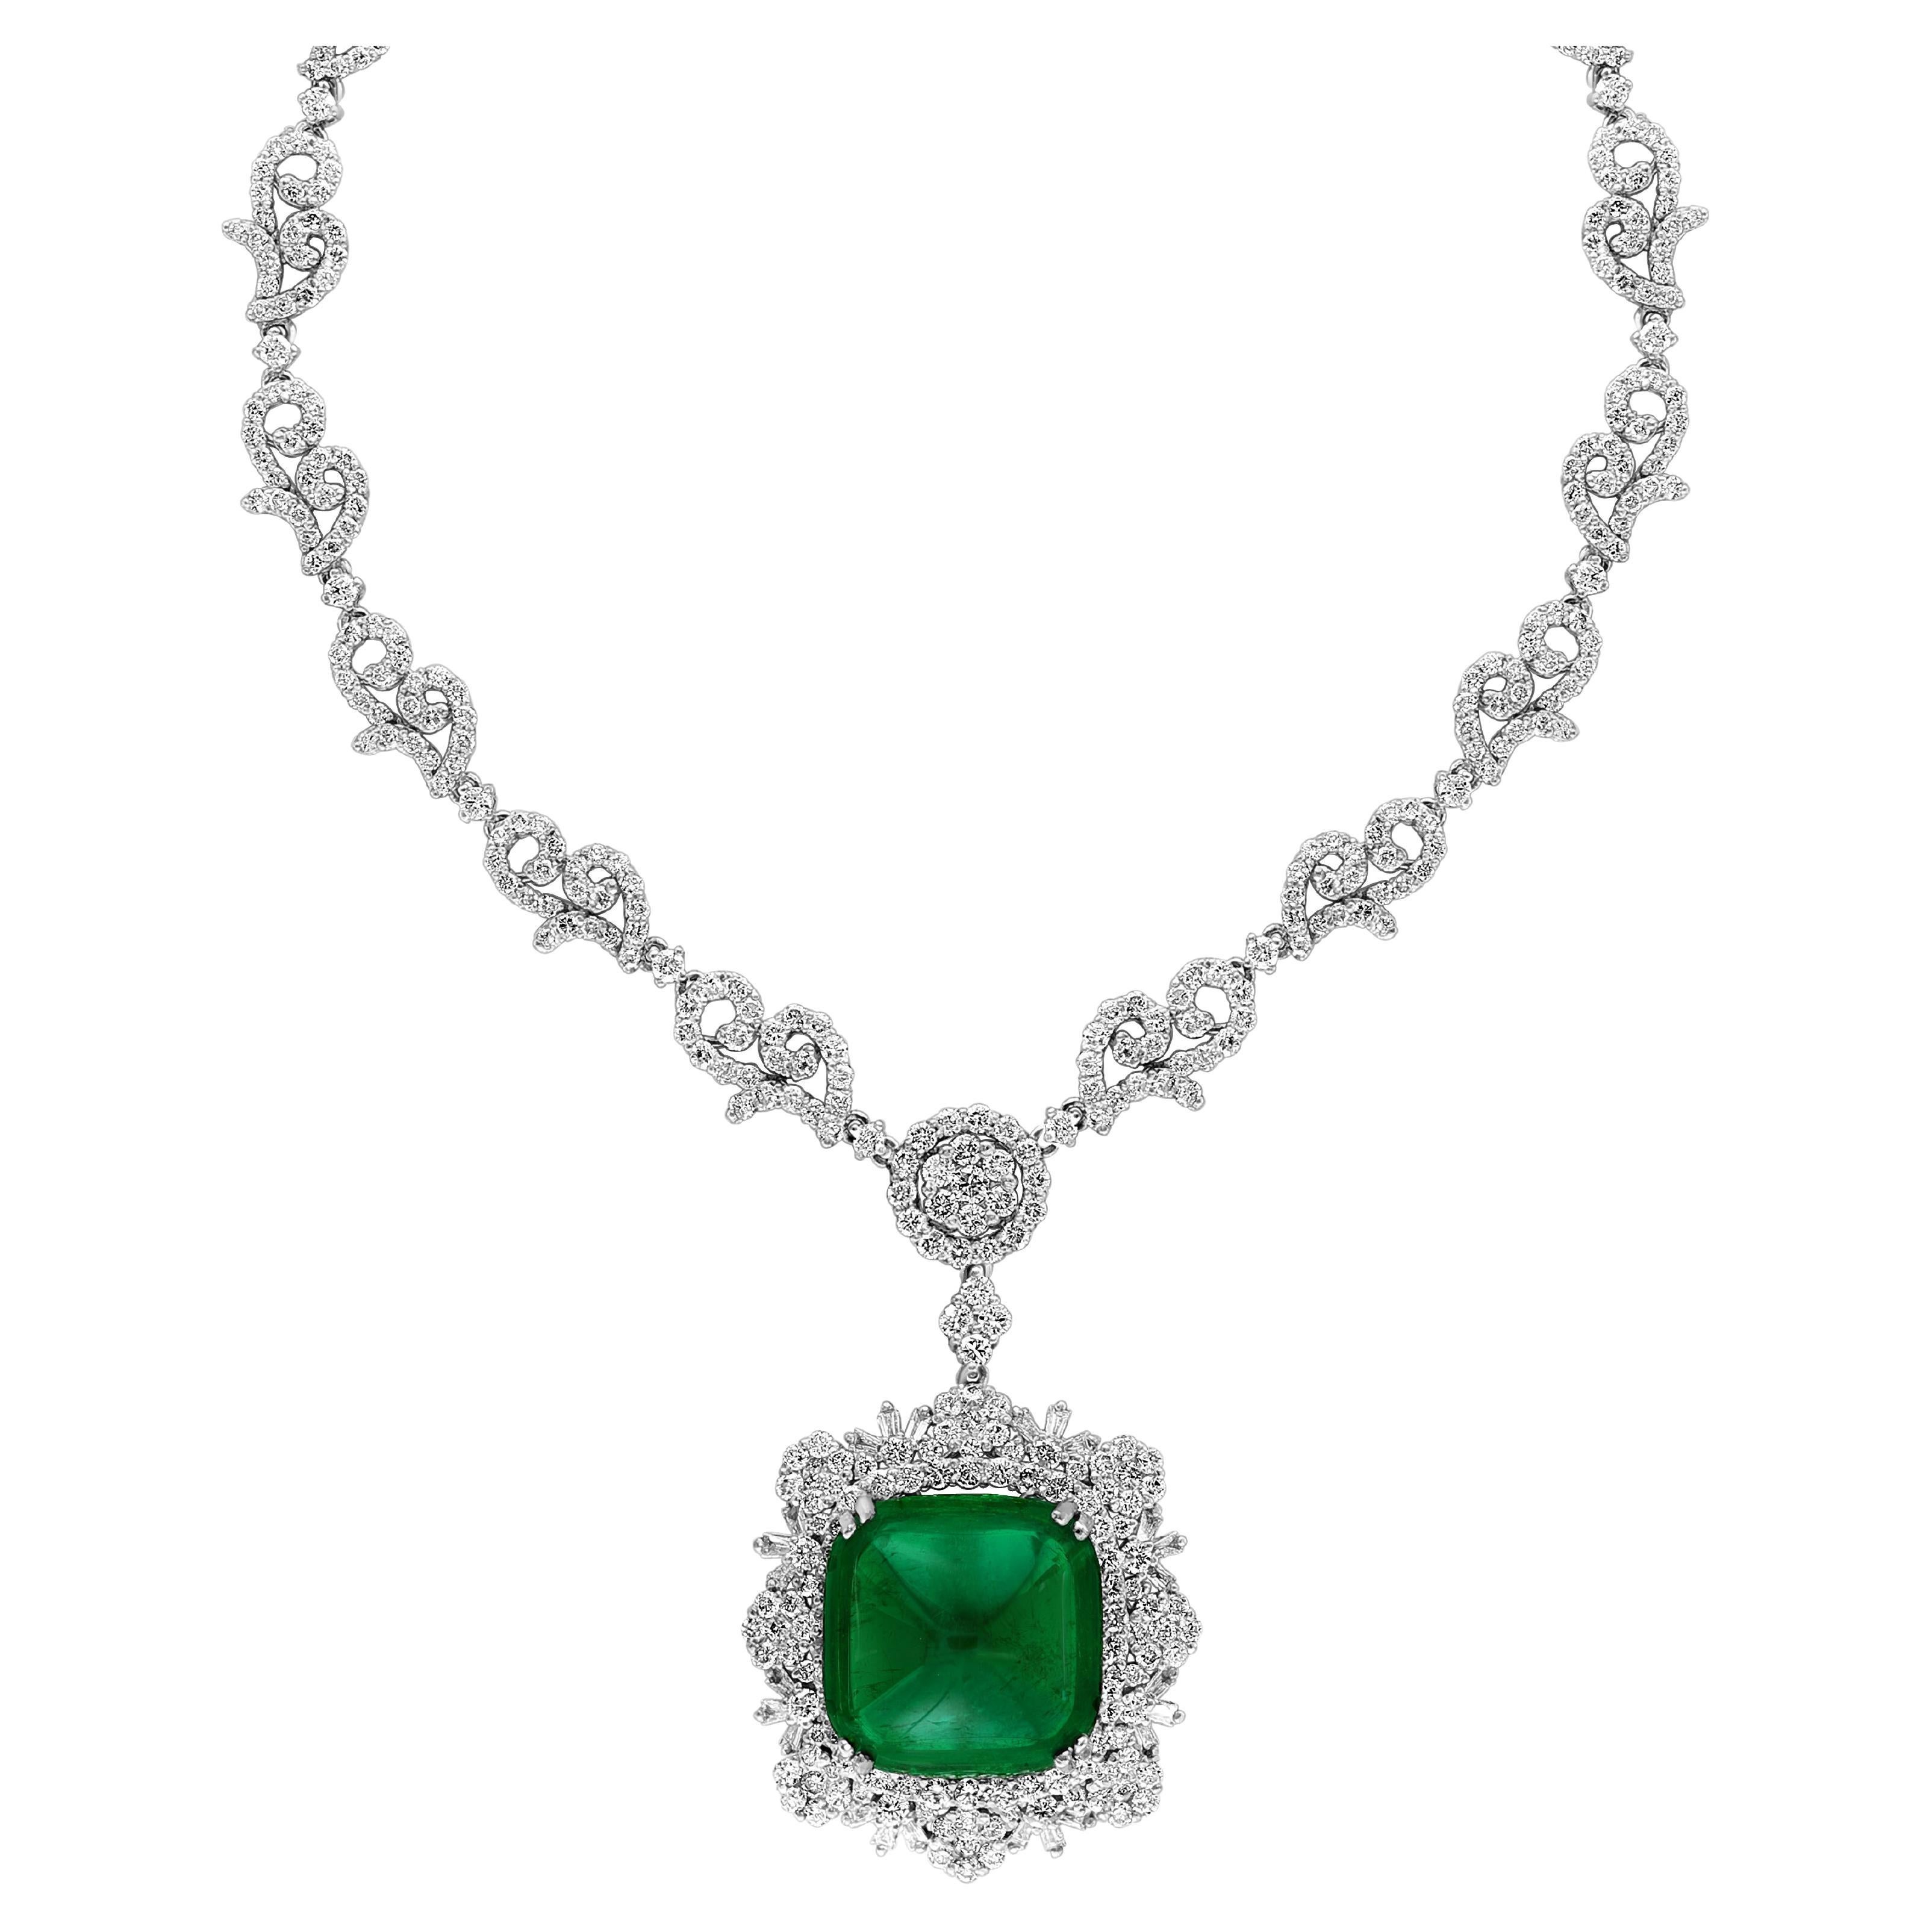 GIA 17 Ct Sugar Loaf Cabochon Colombian Emerald & 13 Ct Diamond Necklace 18KWG